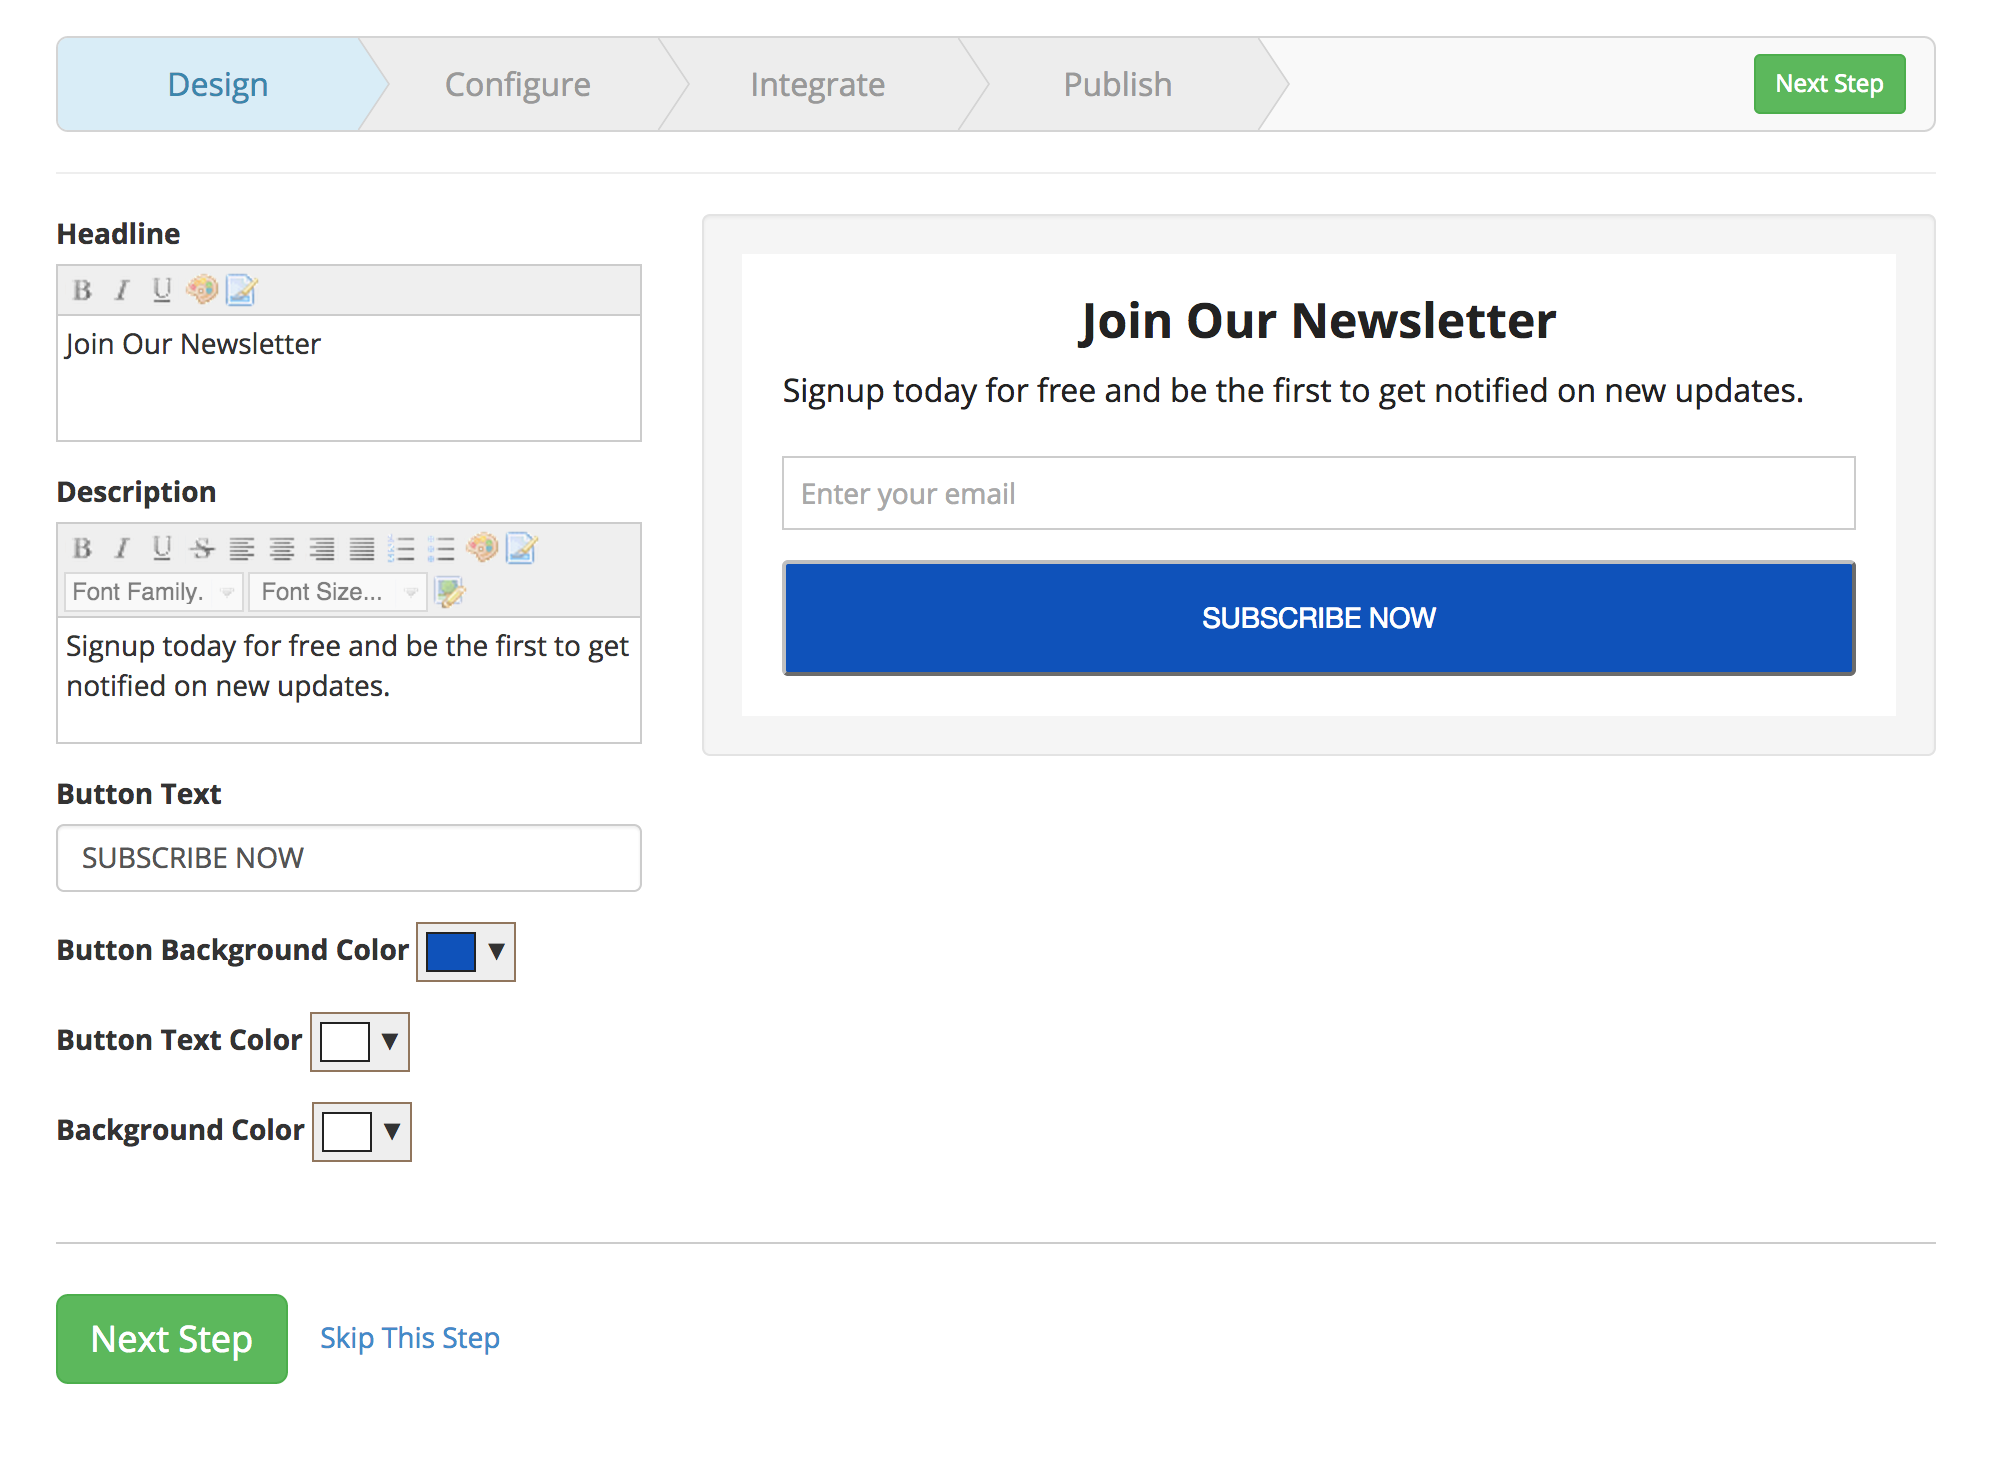 This is the AWeber optin form designer by MailMunch where you can customize your optin form